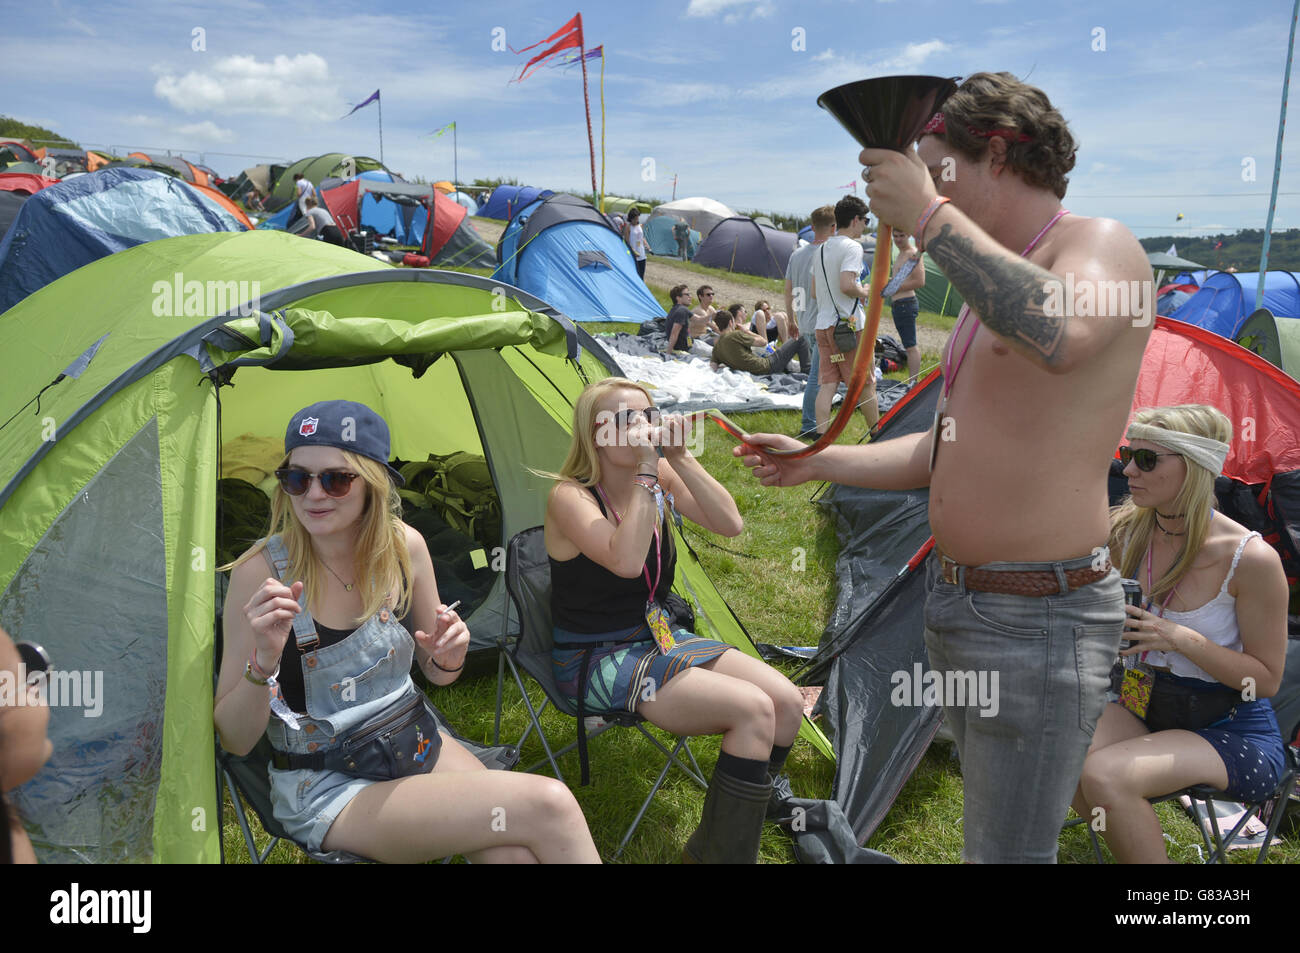 Chloe, 22, (surname not given) drunks fruit cider through a funnel and tube, also known as 'chugging' at the Glastonbury Festival, at Worthy Farm in Somerset. Stock Photo